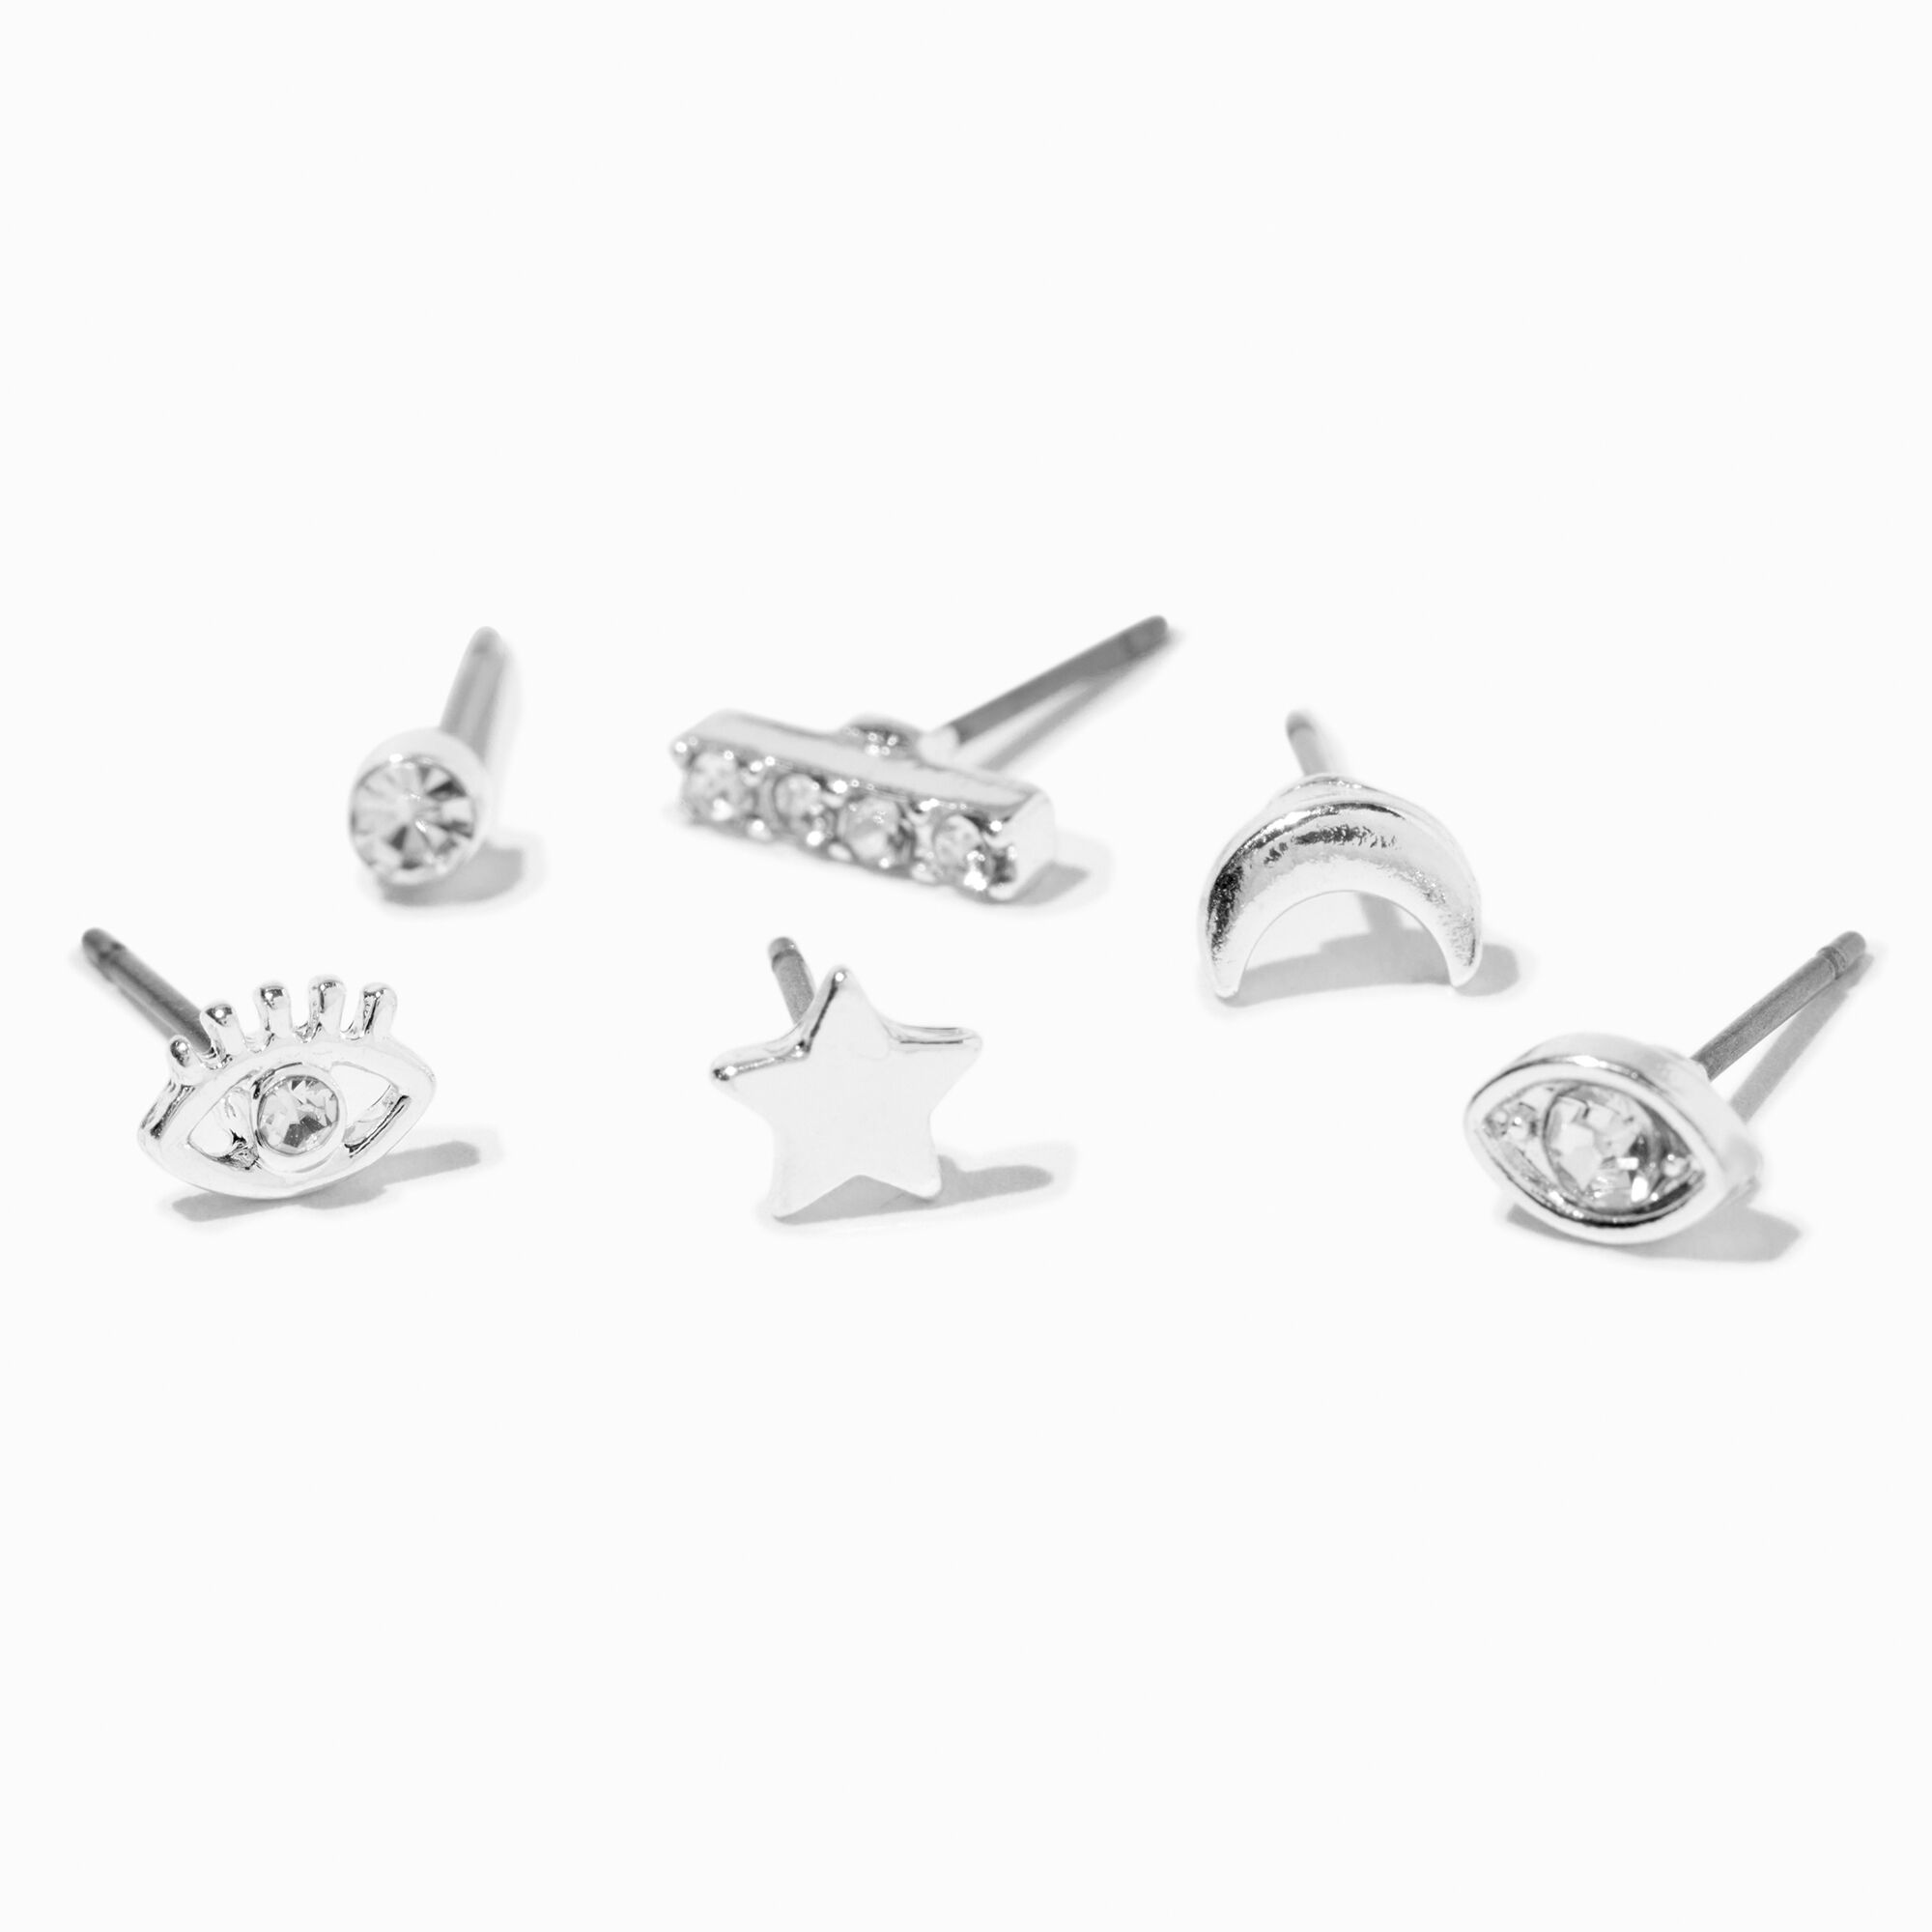 View Claires Tone Celestial Stackable Stud Earrings 6 Pack Silver information